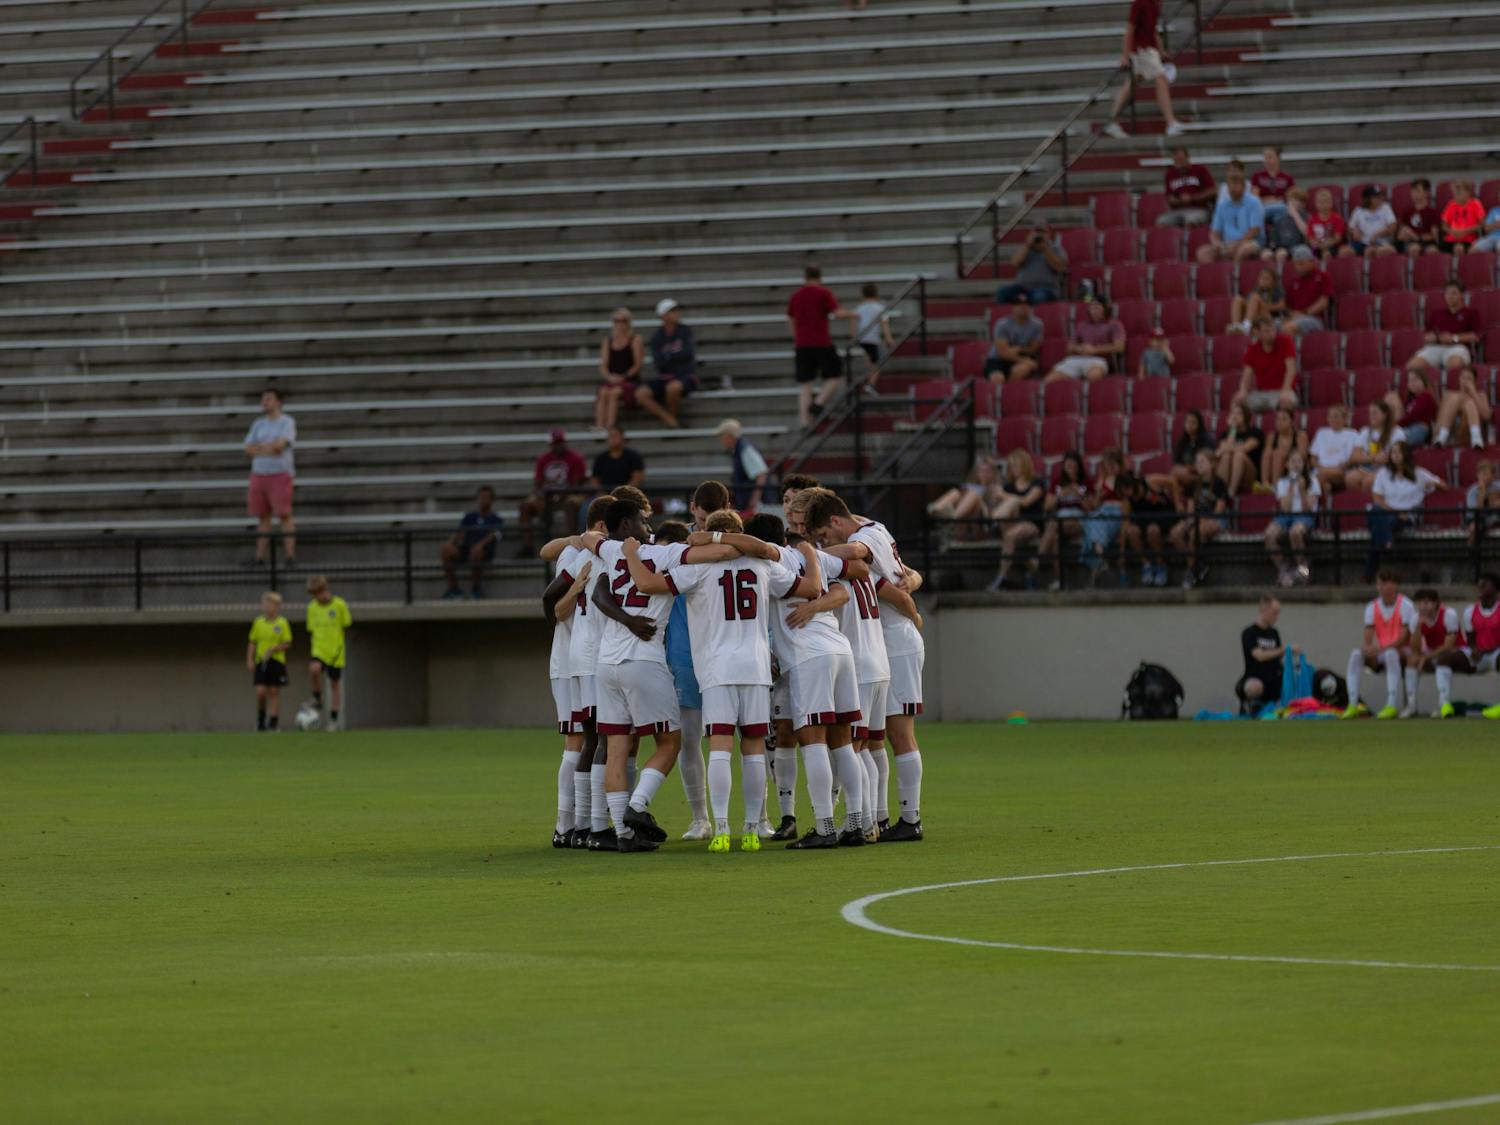 The South Carolina men's soccer team huddles during a game against the Campbell Camels on Sept. 17, 2022. The Gamecocks defeated Campbell 1-0.